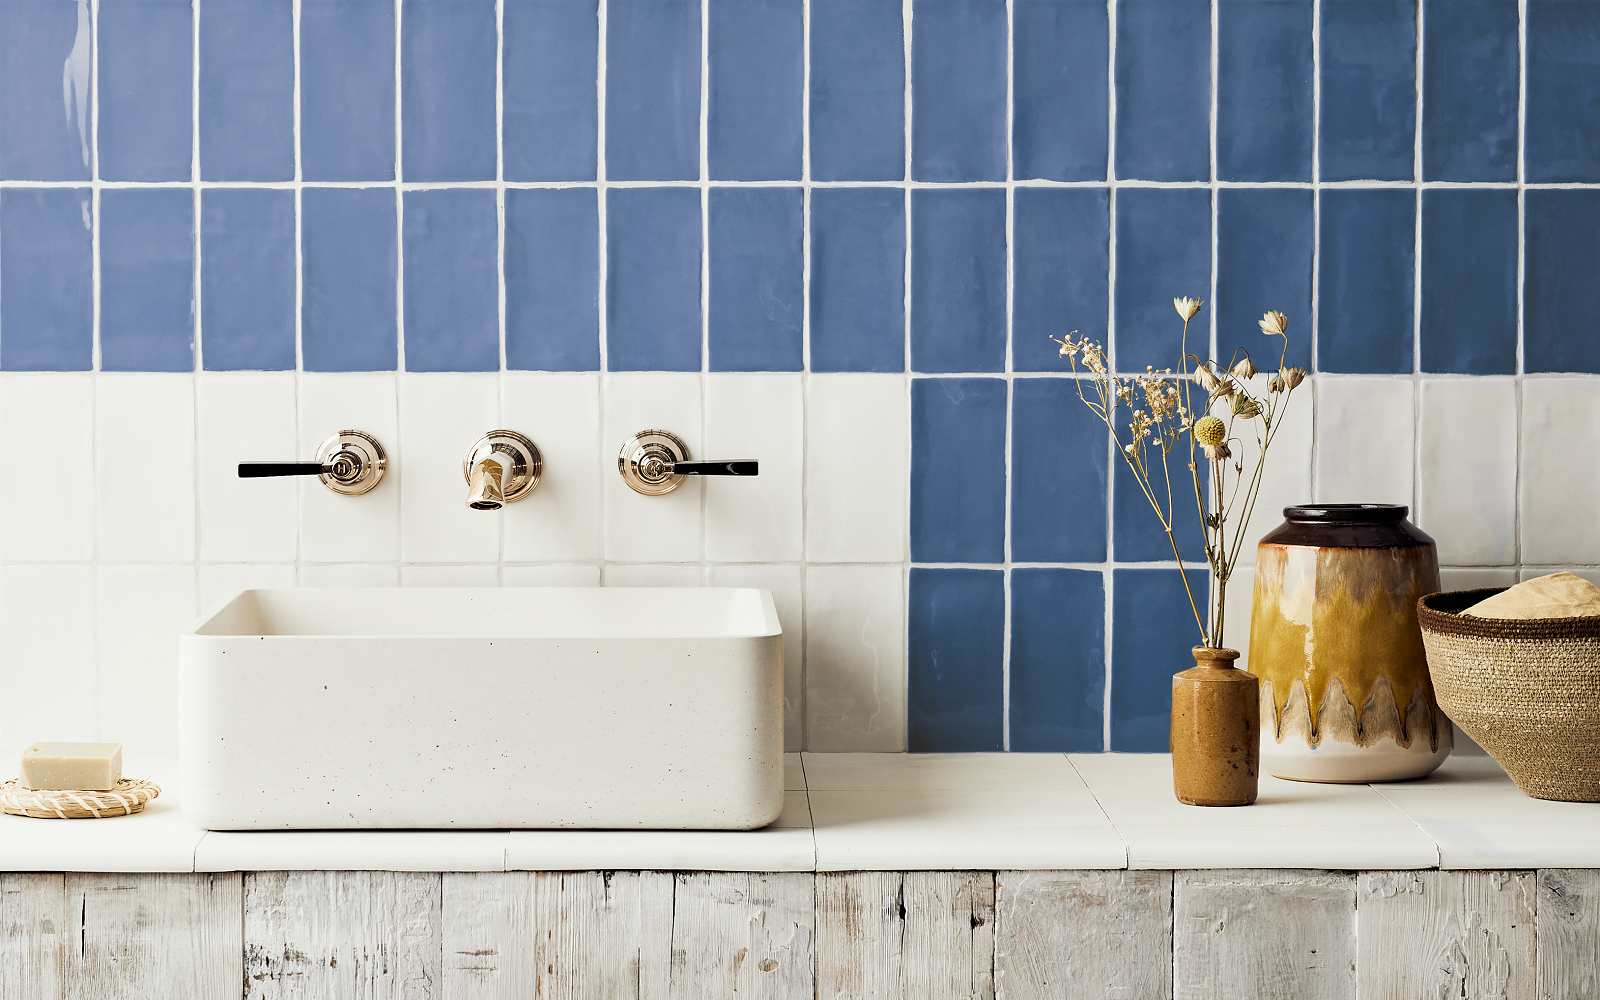 navy blue glazed tiles in contrasting pattern to cream glazed tiles from Hyperion tiles behind a concrete basin on a wooden surface